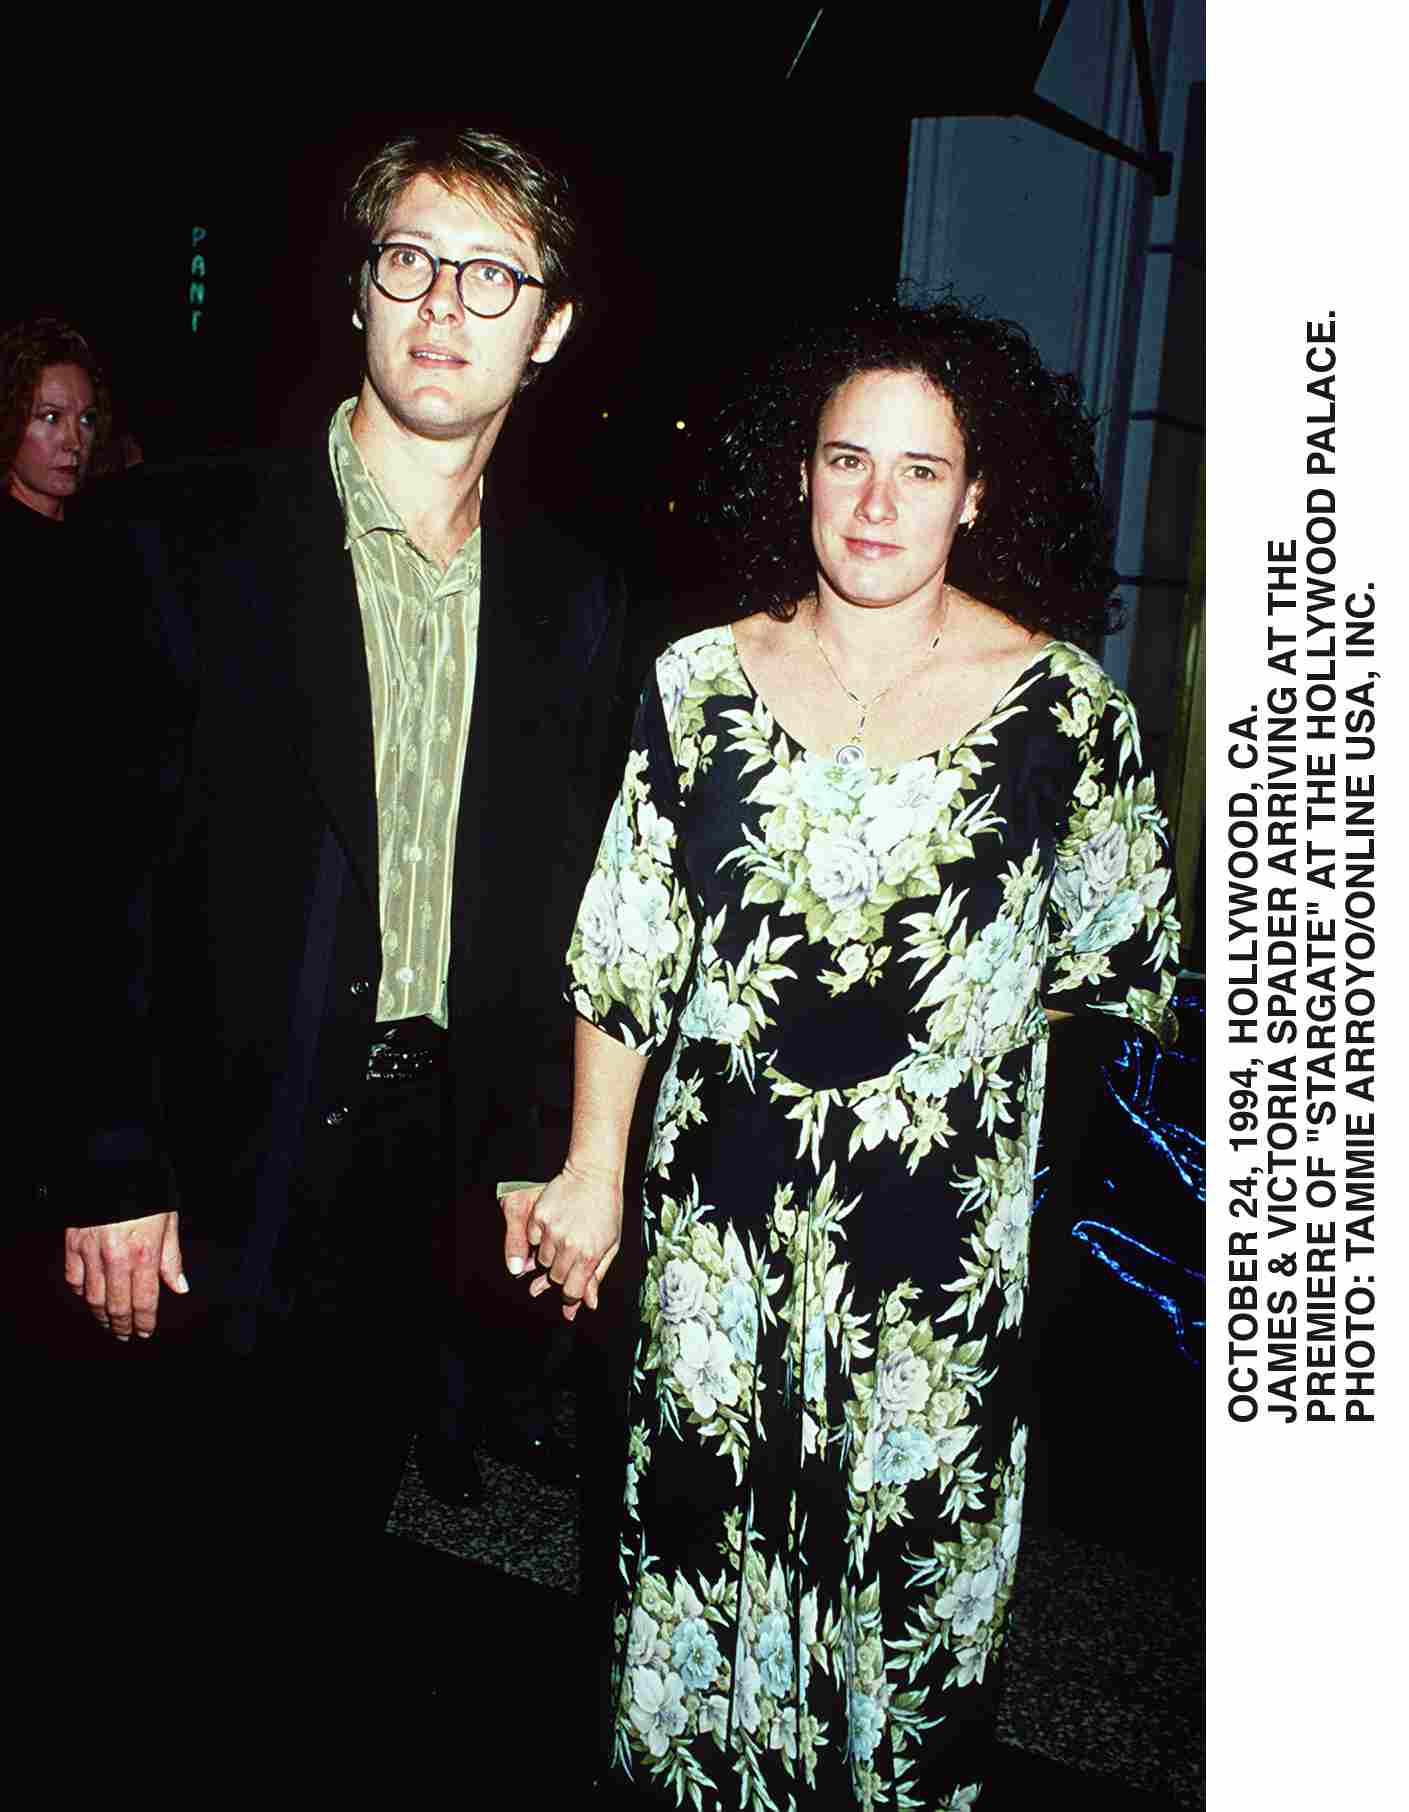 James Spader and Victoria Spader arrive at the premiere of "Stargate" at Mann's Chinese Theatre on October 24, 1994, in Hollywood, California. | Source: Getty Images